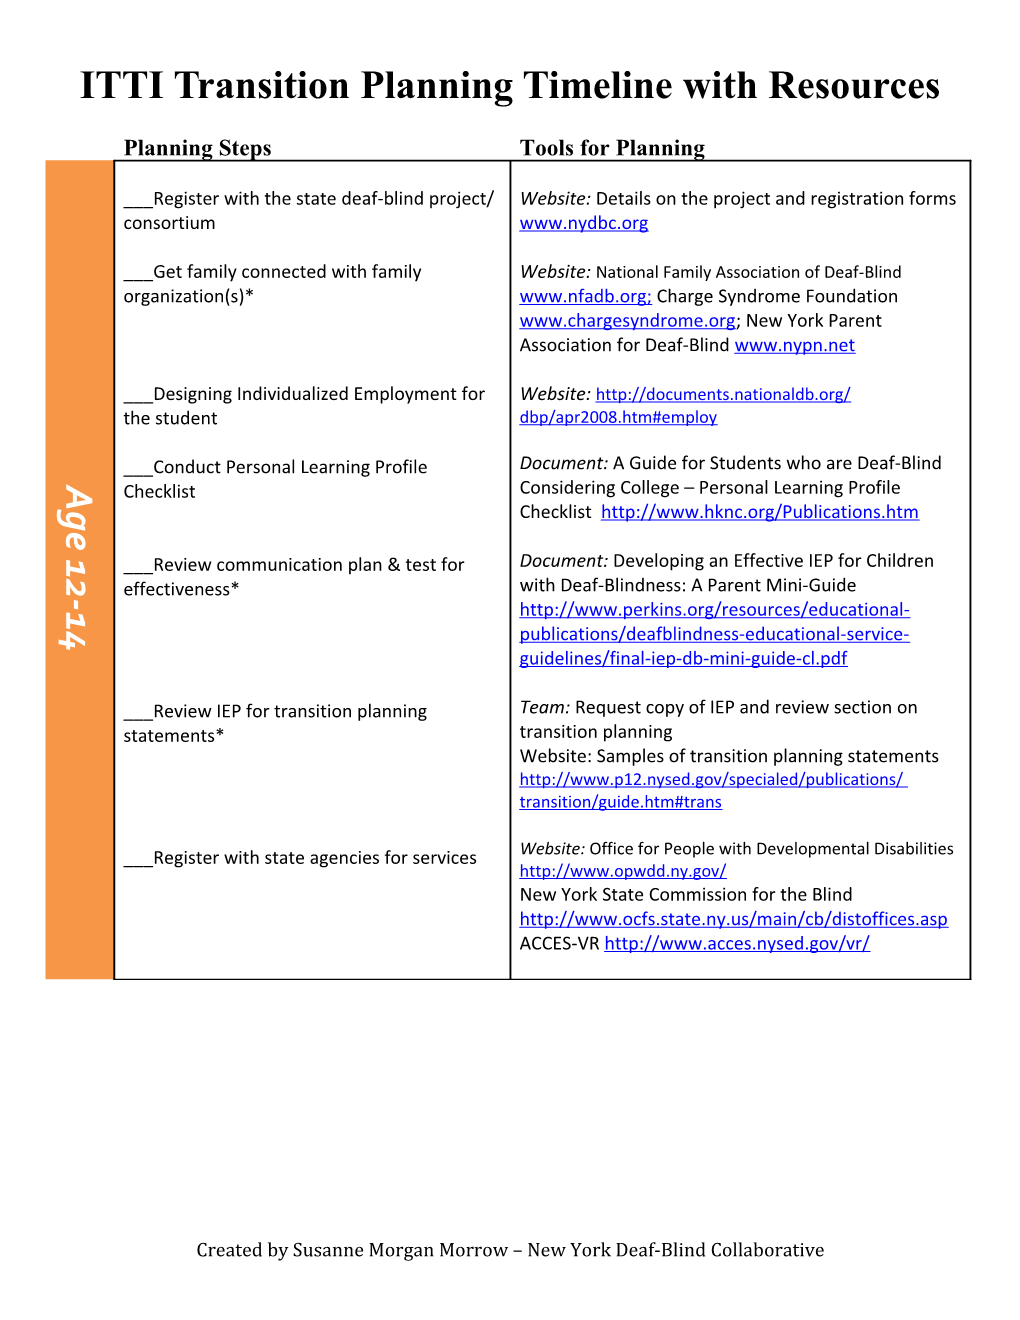 ITTI Transition Planning Timeline with Resources